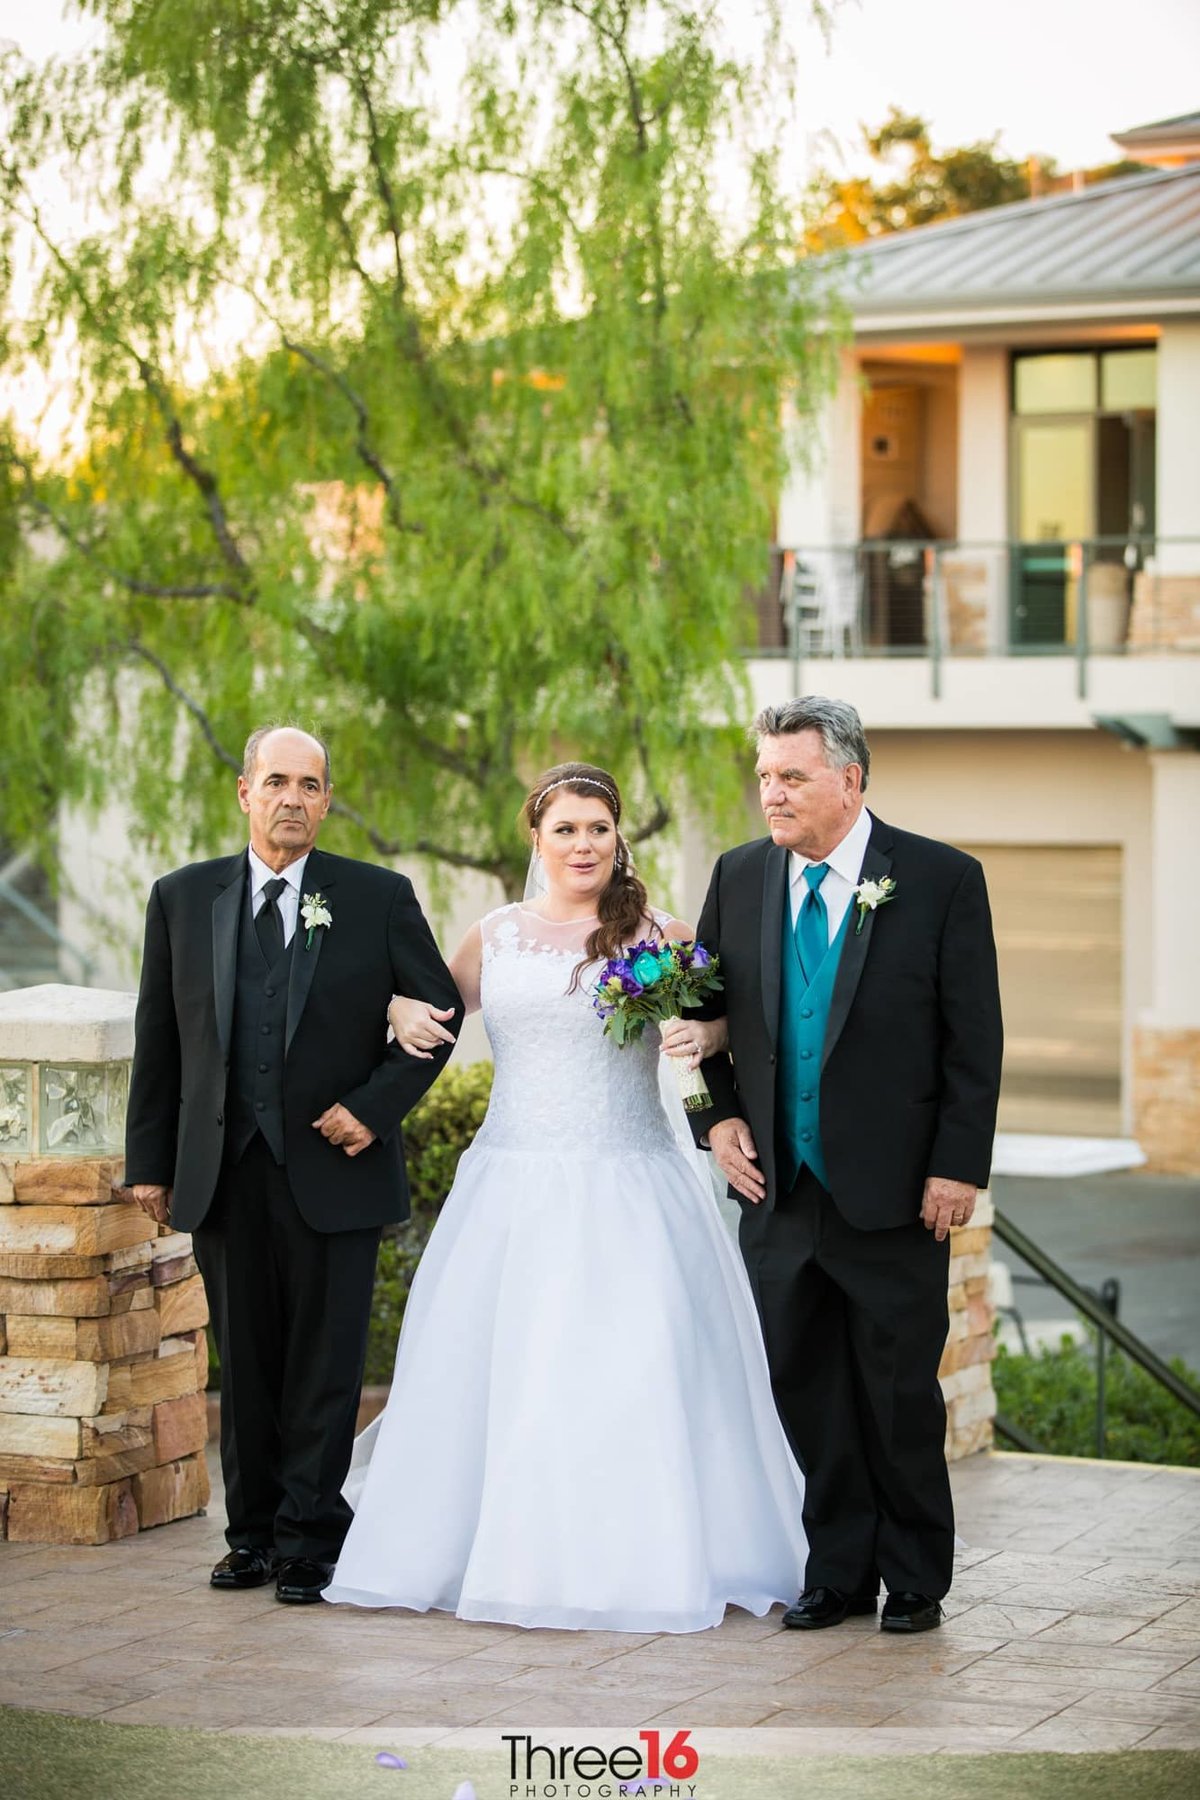 Bride being escorted by her two dads